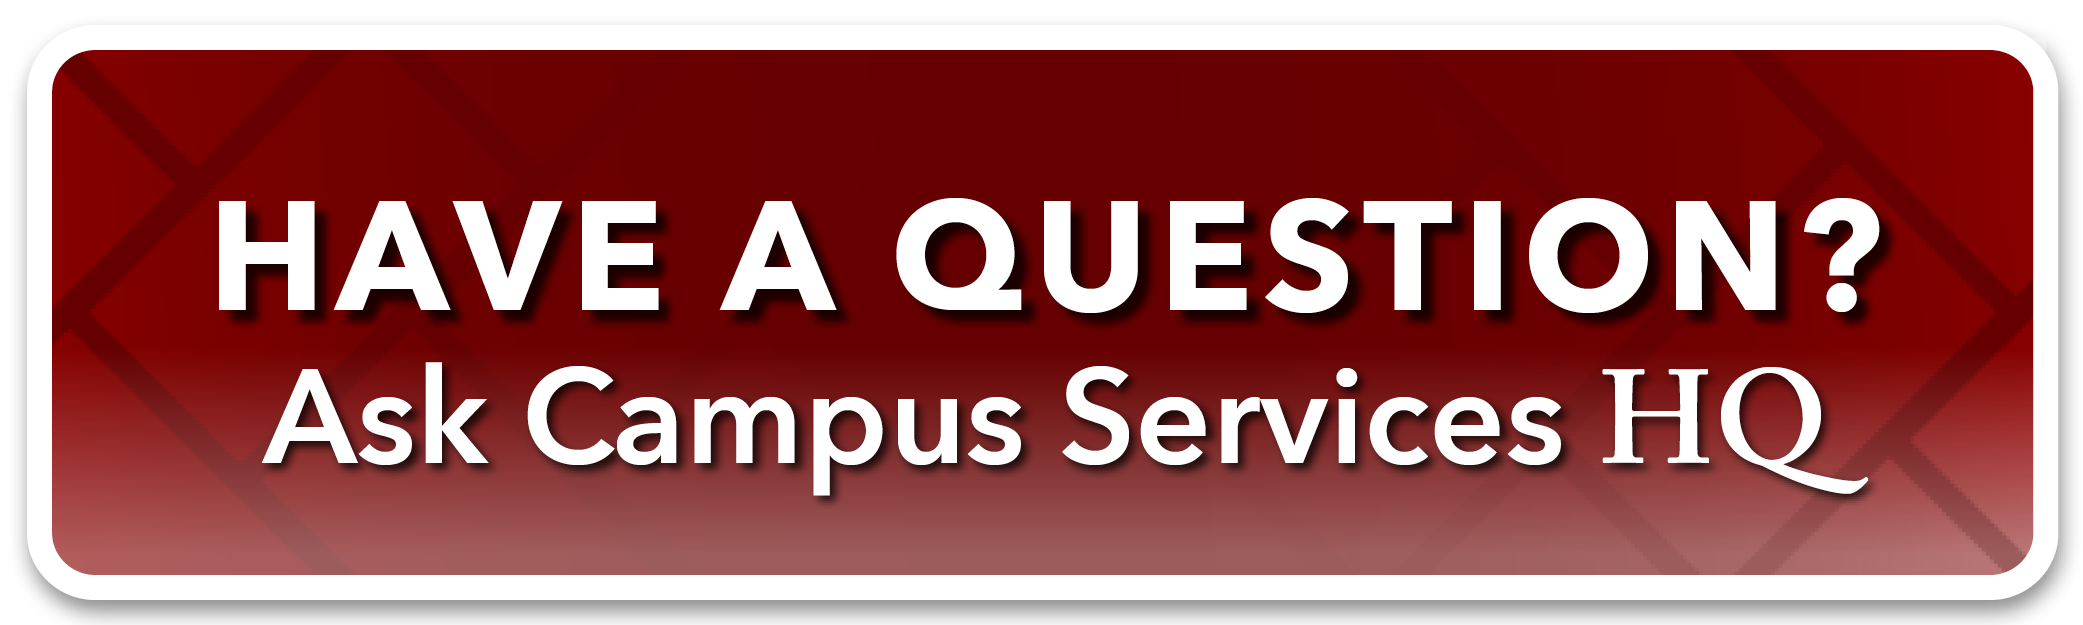 clickable button that says "Have a Question? Ask Campus Services HQ"